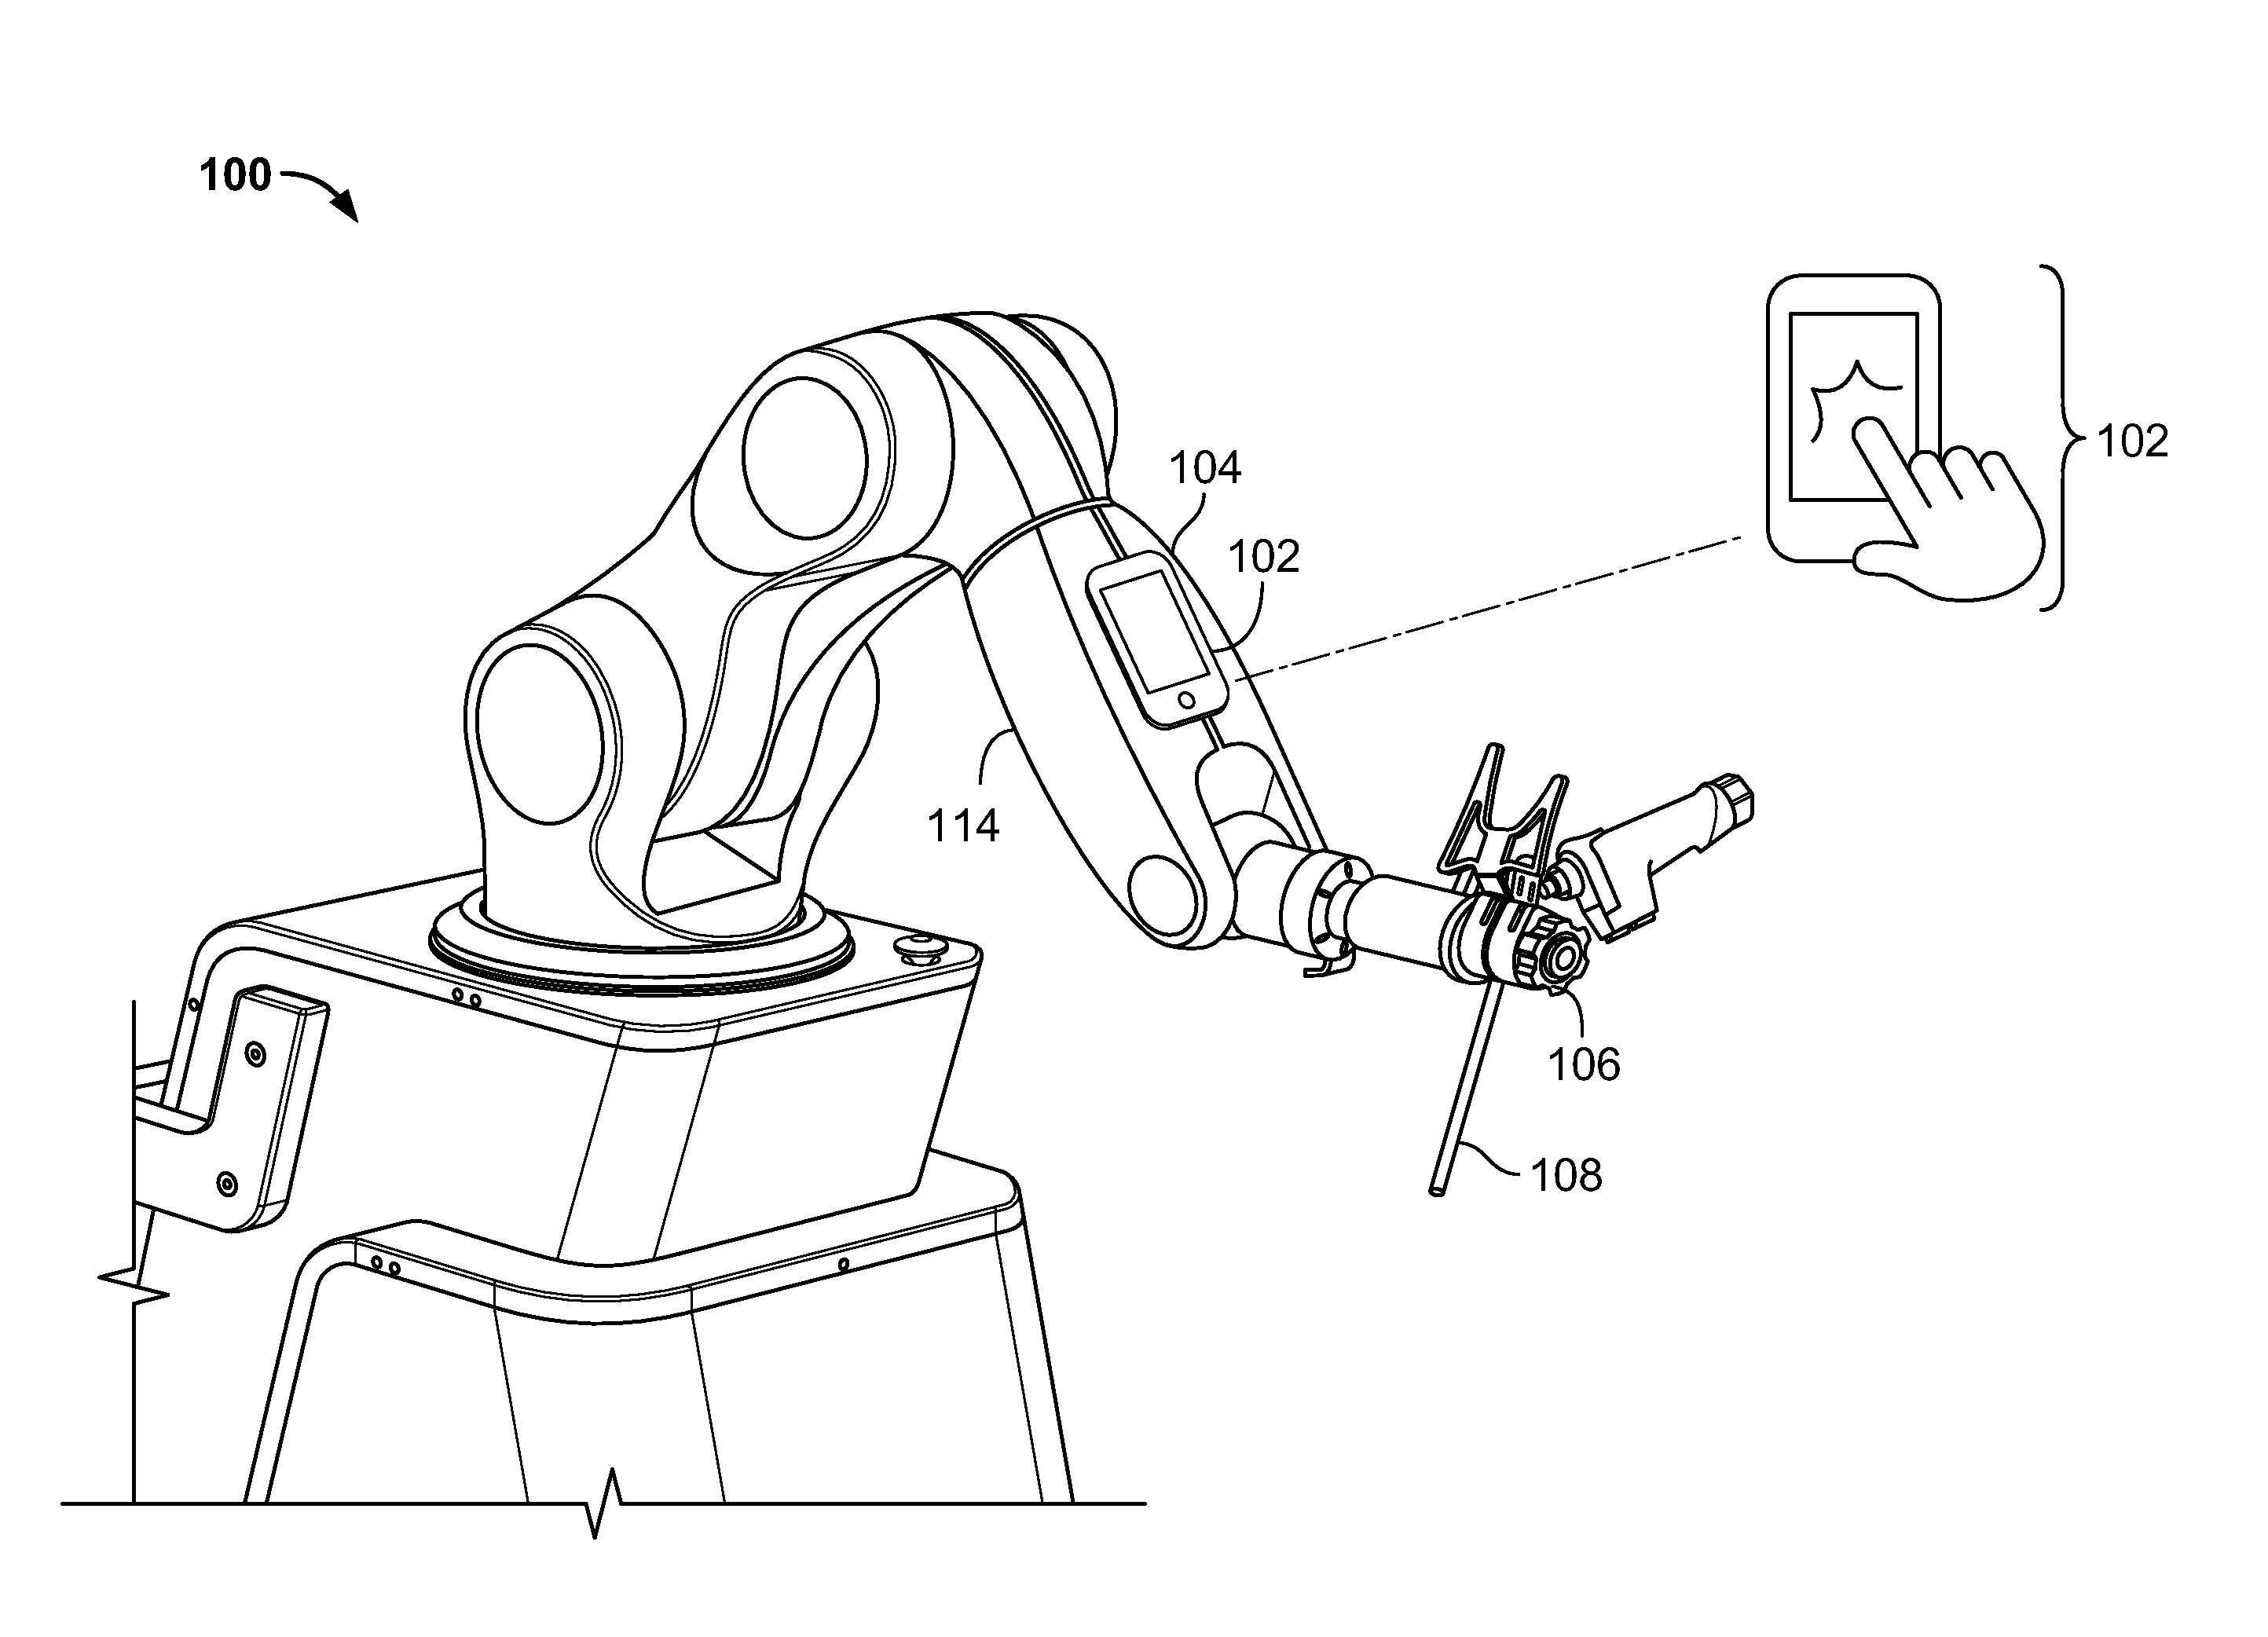 Robot-Mounted User Interface For Interacting With Operation Room Equipment